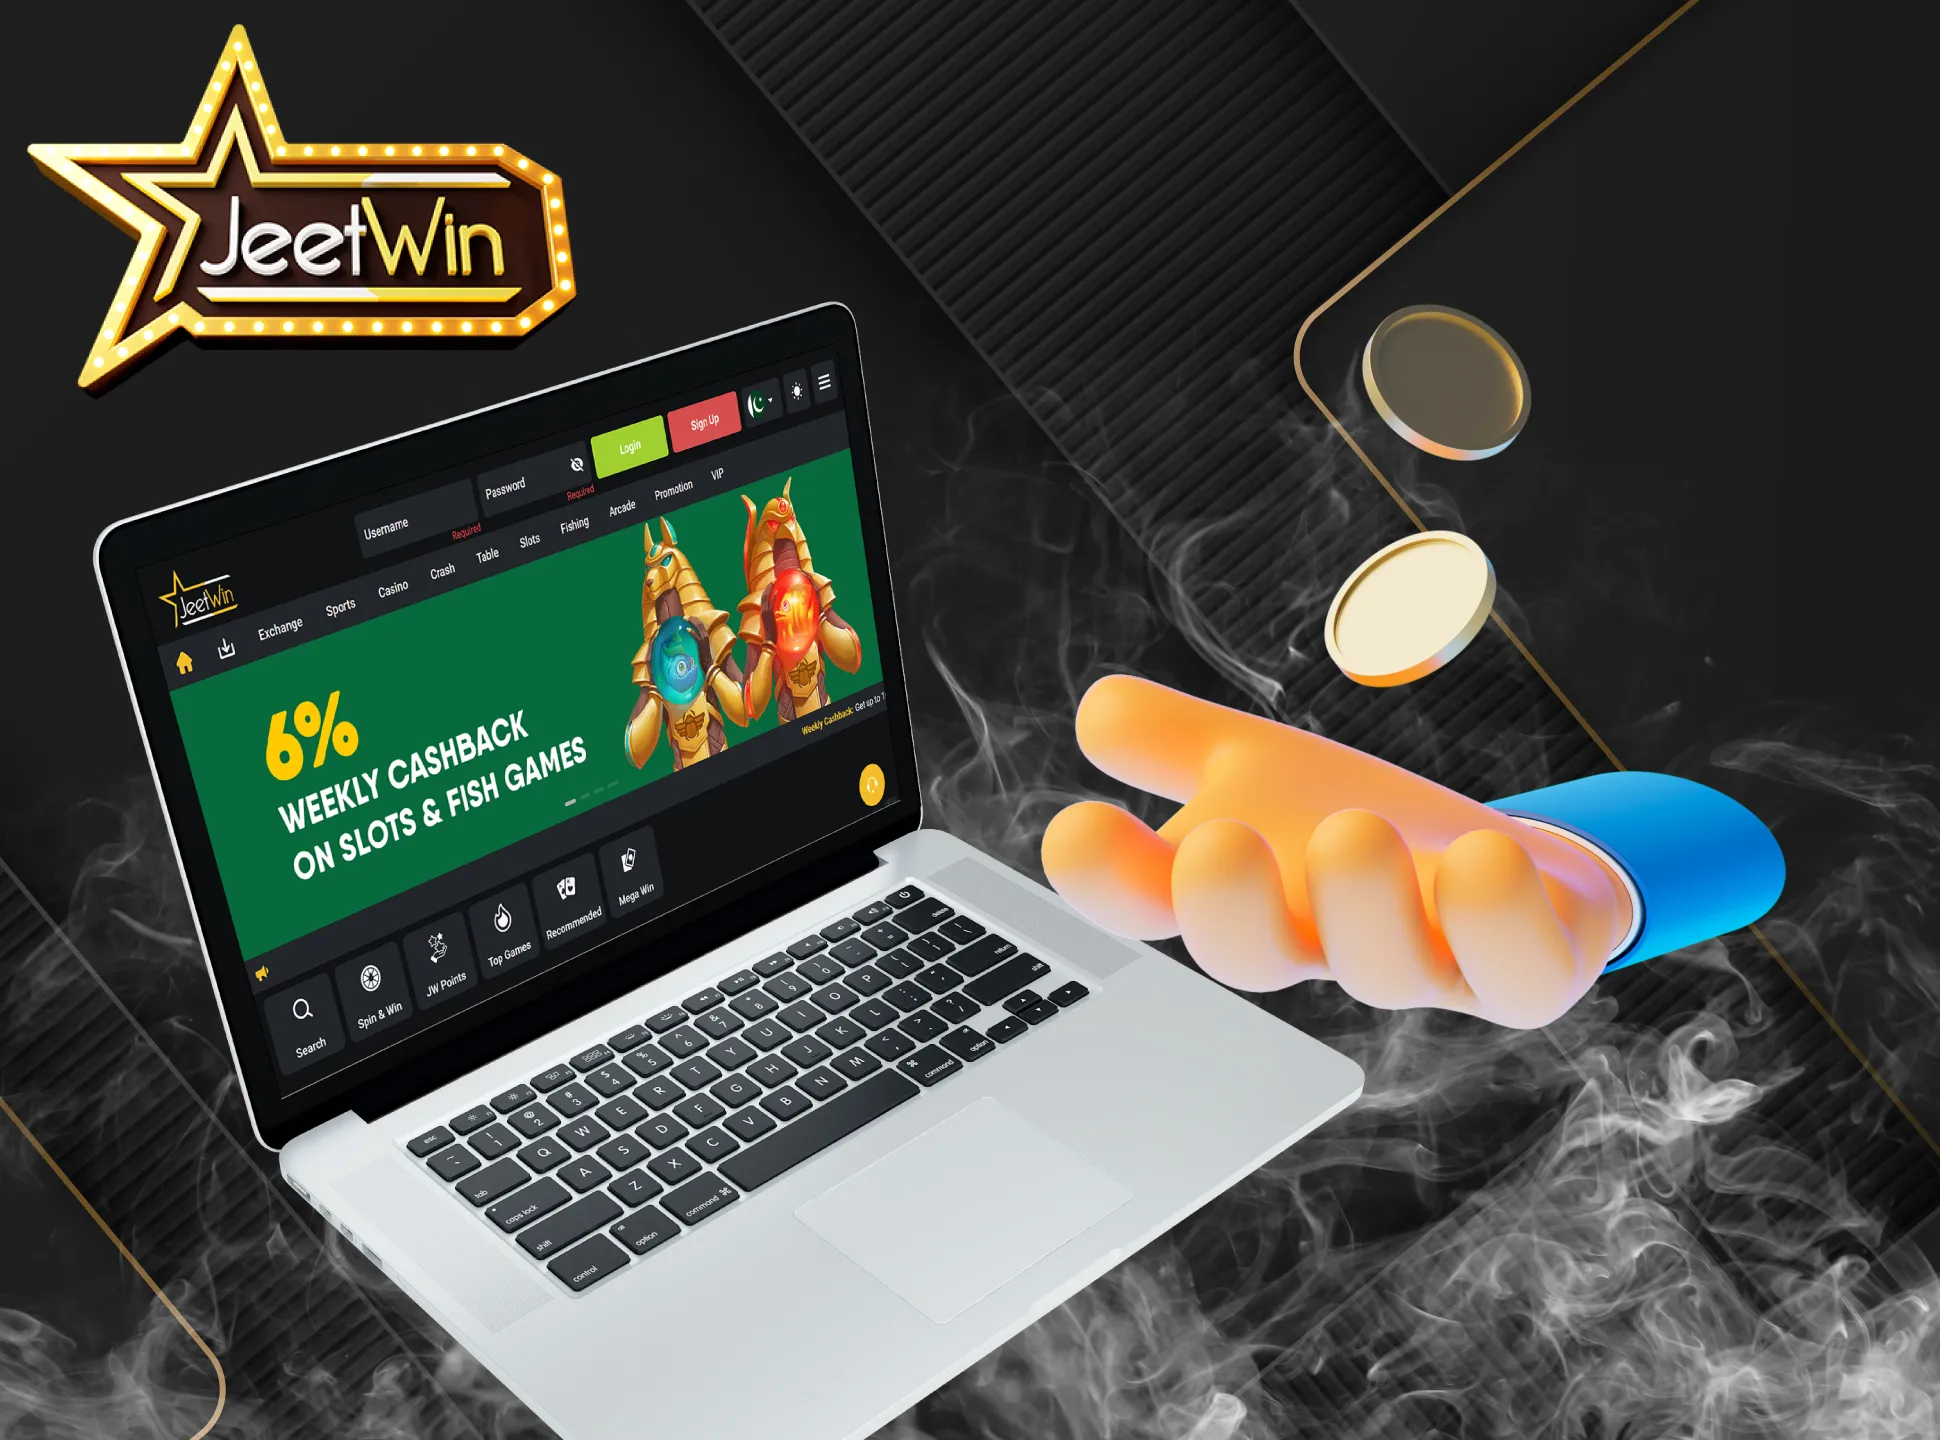 Follow the instructions to withdraw money from JeetWin.